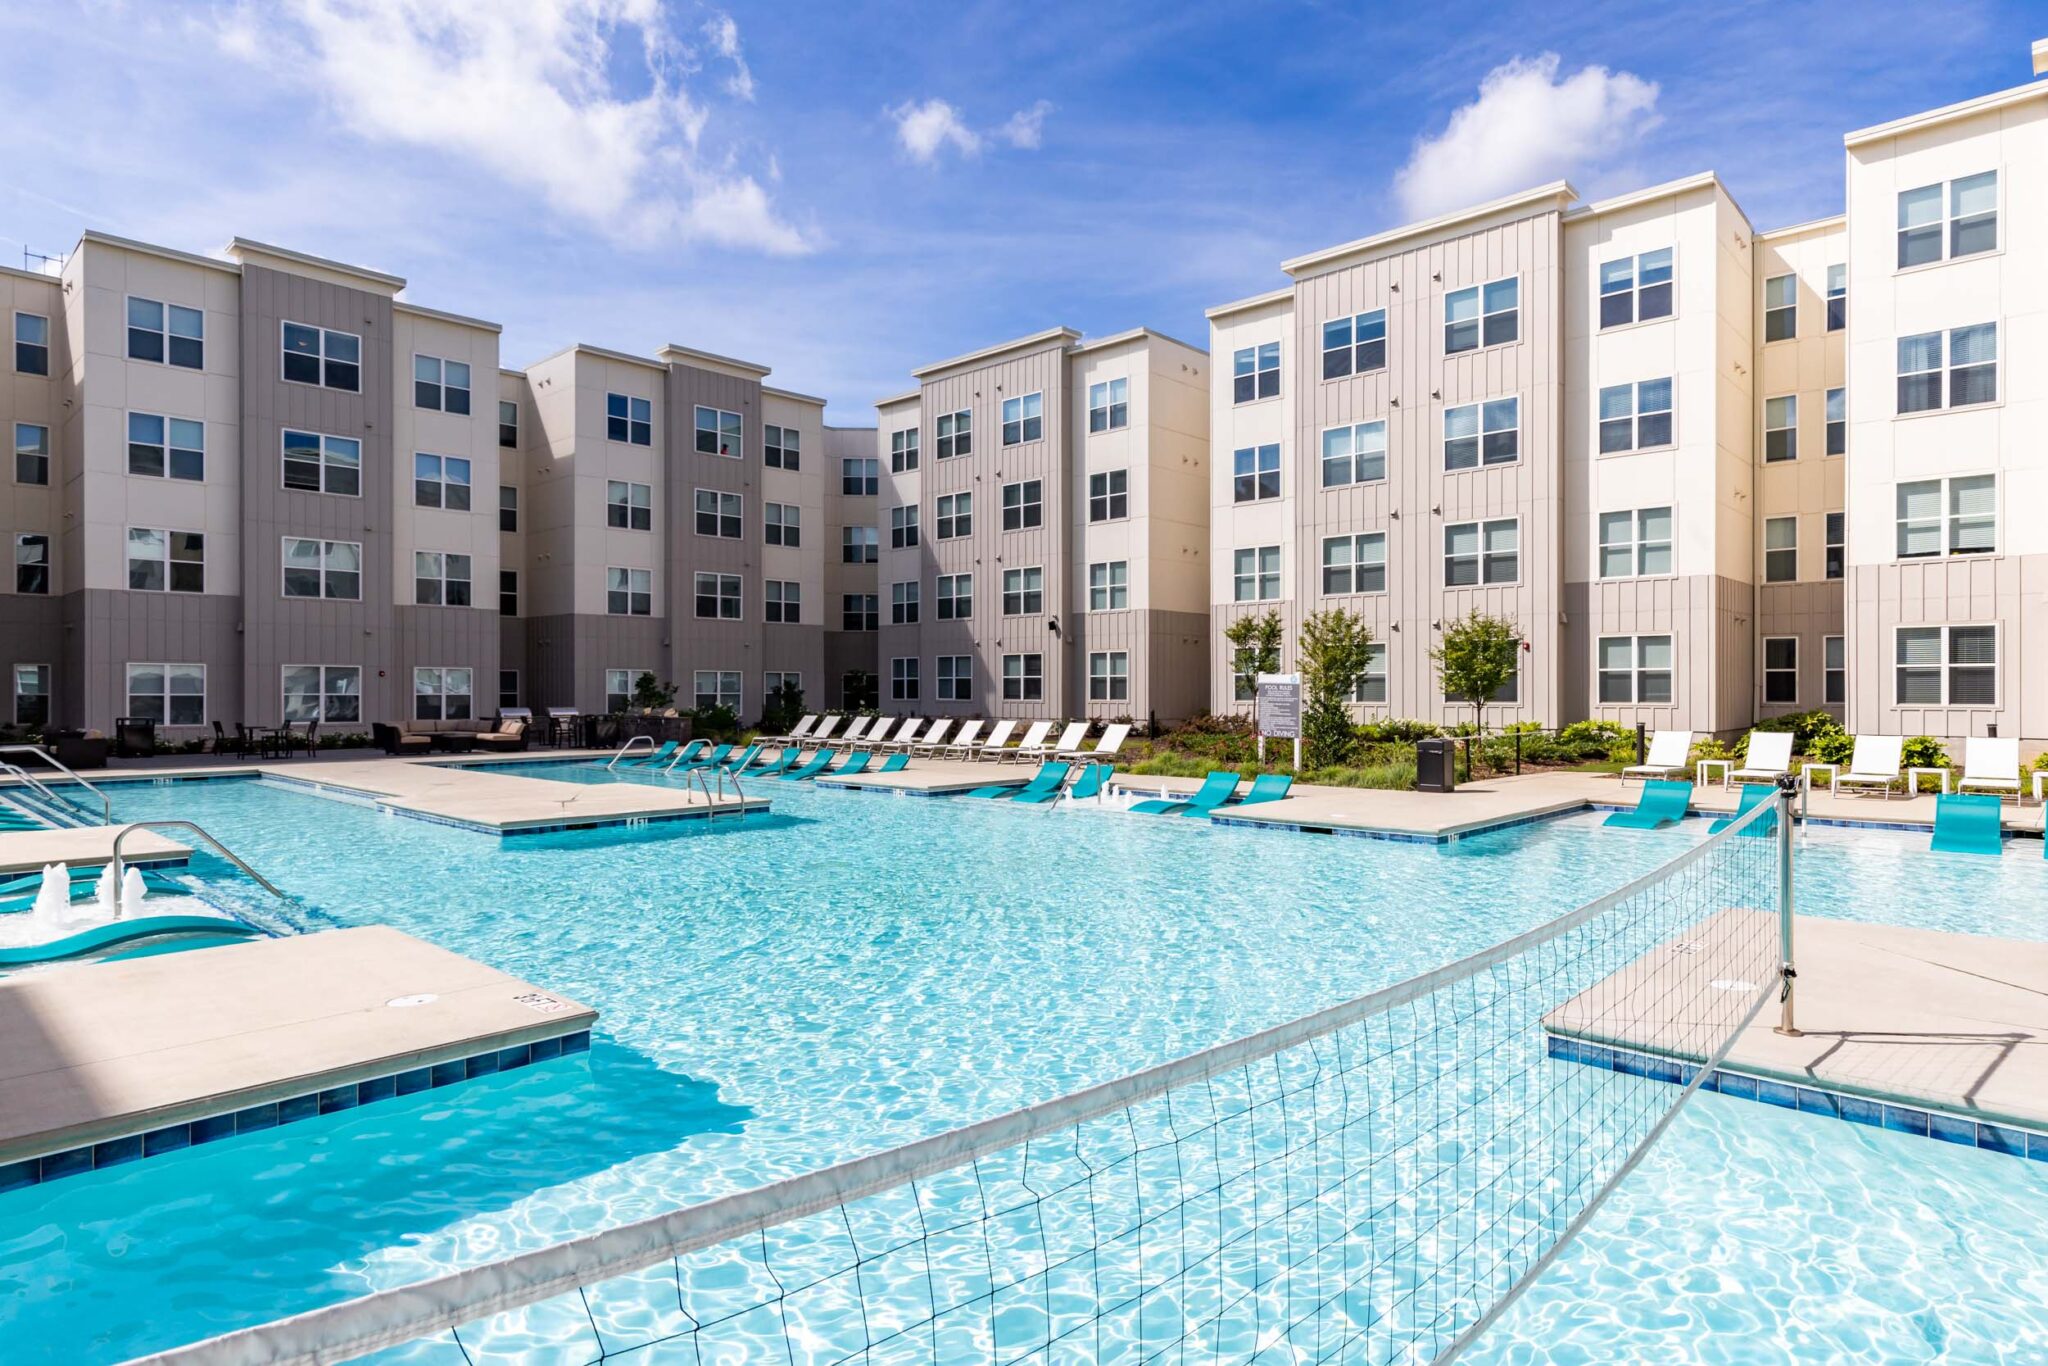 Scenic pool area with volleyball net in apartment complex